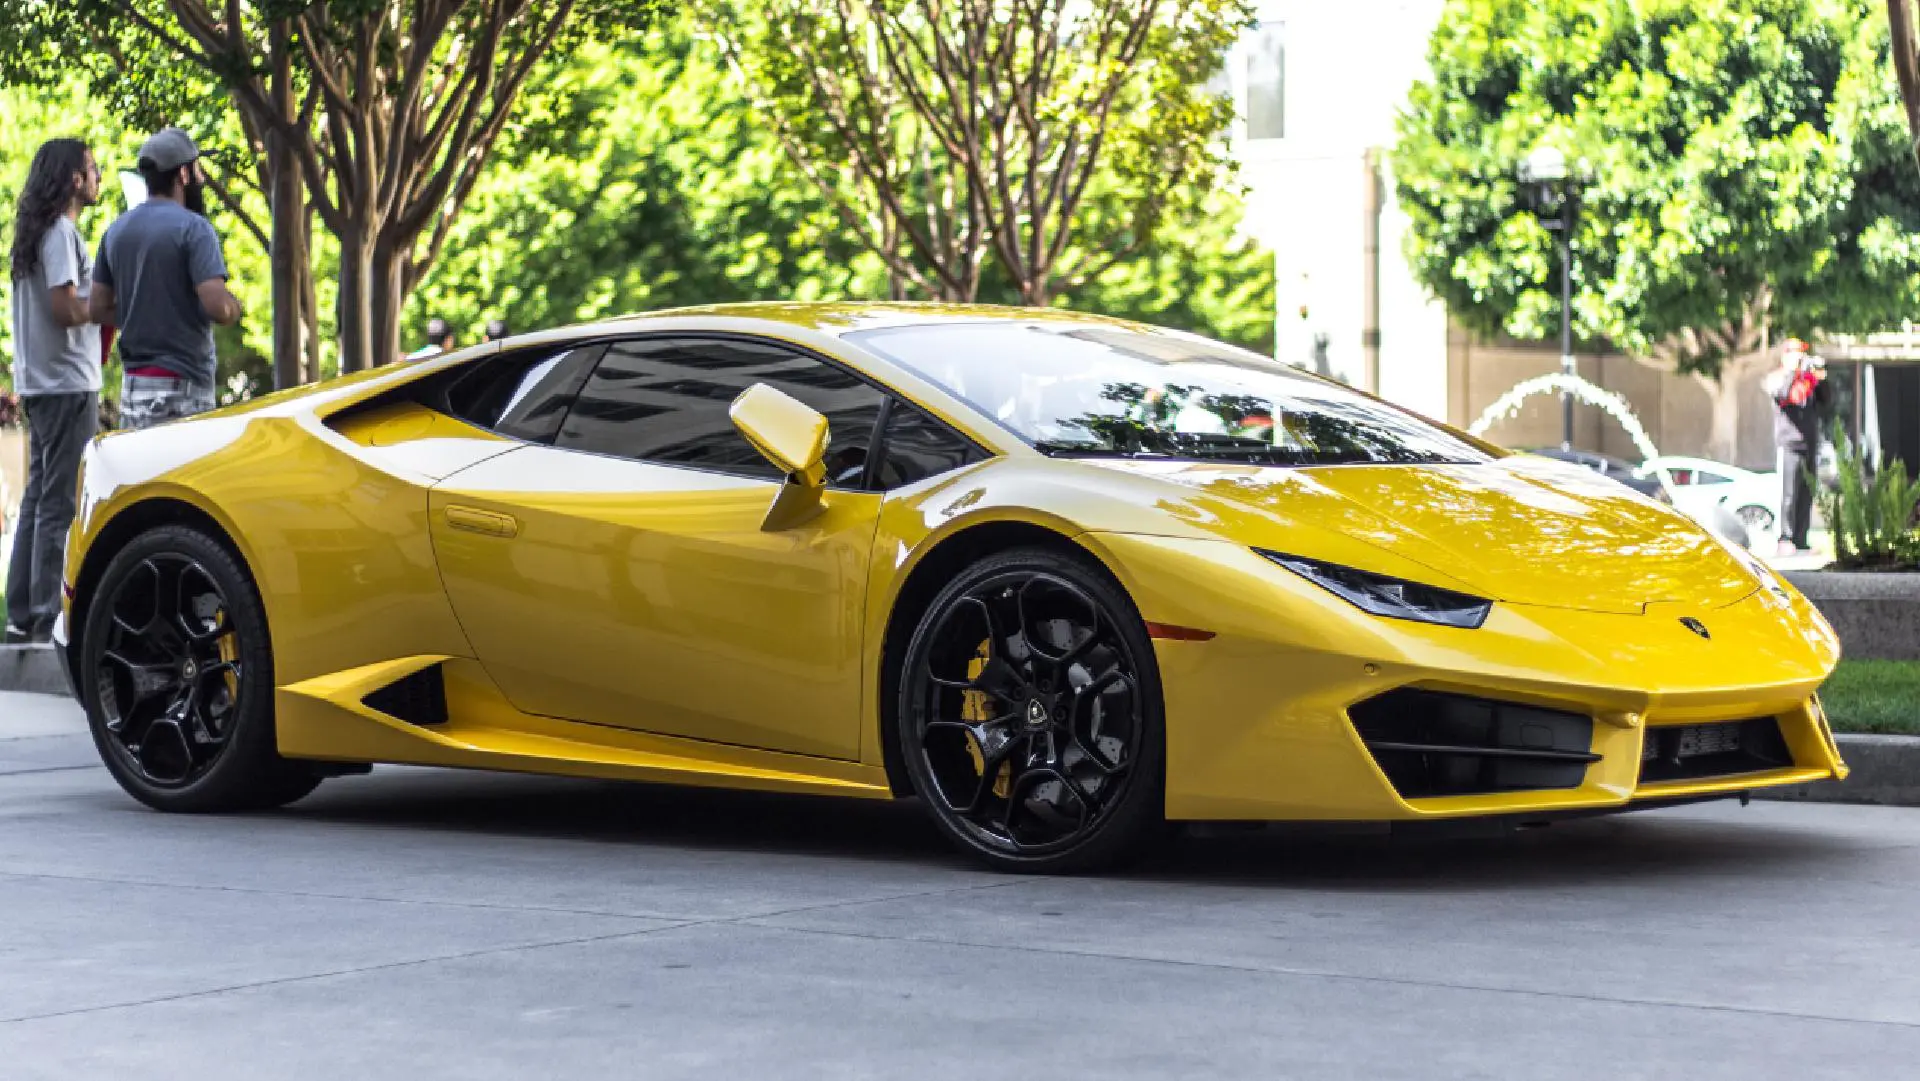 A beautiful sports car in yellow color